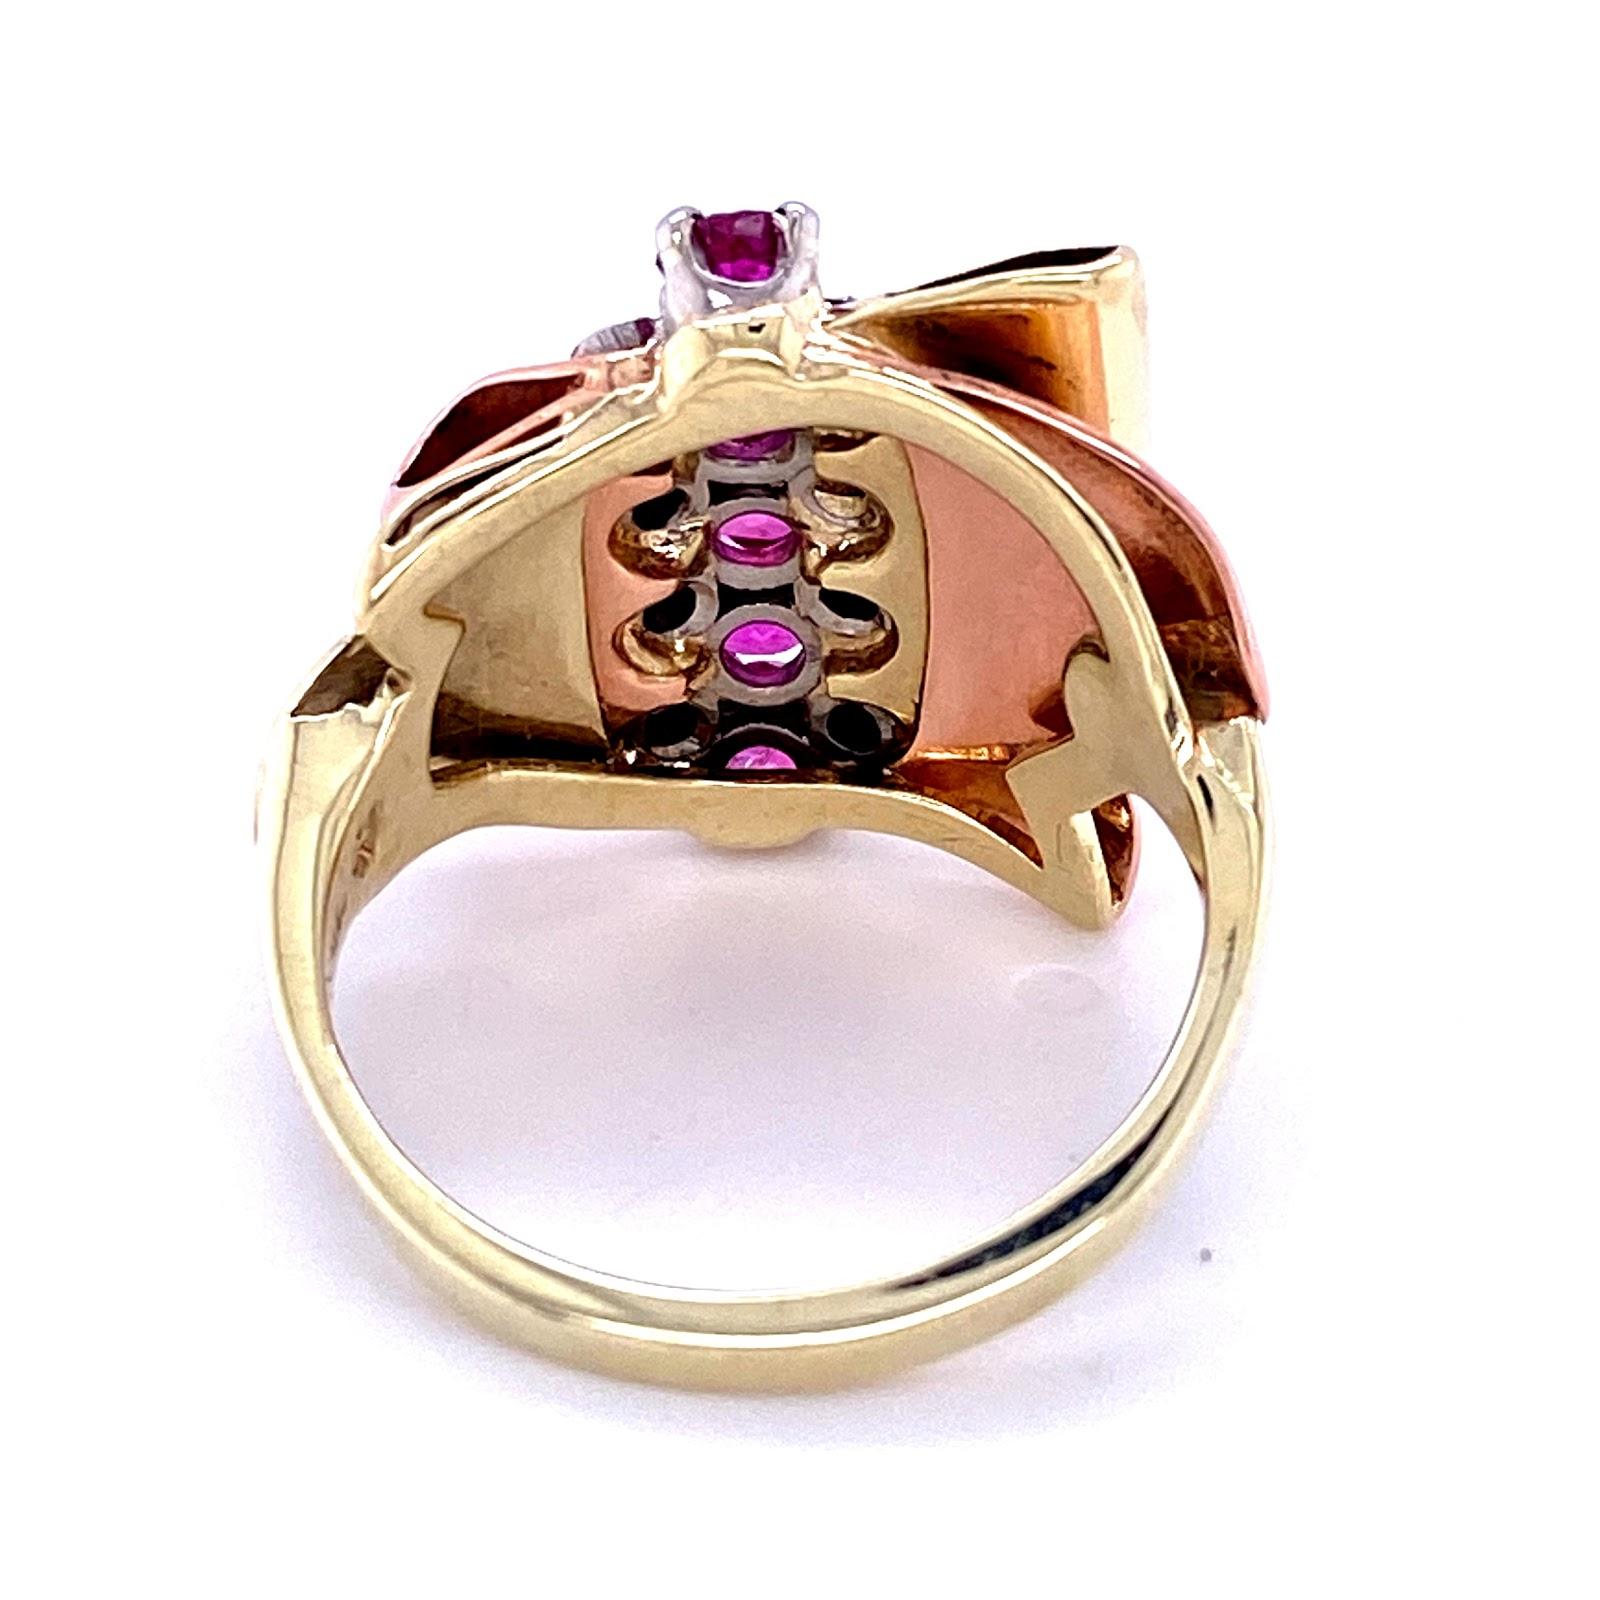 14 karat rose gold, green gold, and palladium ring with a ribbon design. Set with 5 round pink sapphires measuring 3.2 mm each, adn 8 single cut diamonds measuring 0.10 carat total diamond weight in the I - J color range, SI clarity range. The ring